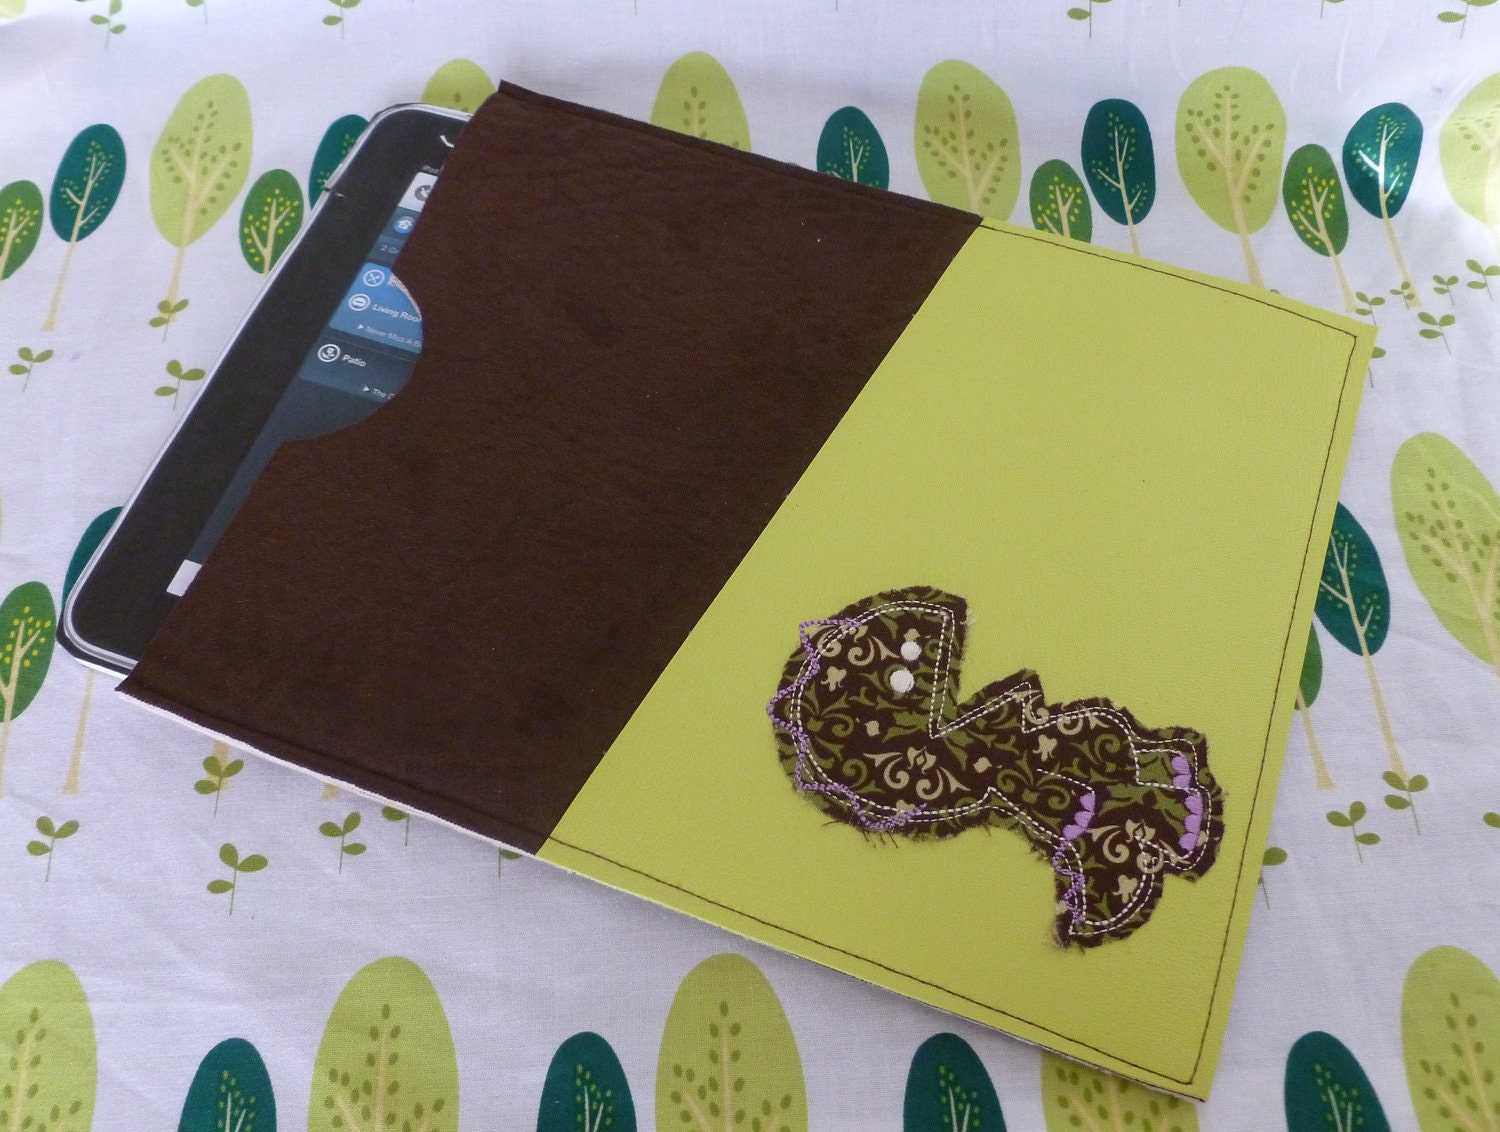 Lime Green Faux Leather and Brown Faux Suede Vinyl Fabric iPad Tablet Sleeve with Appliqued Dinosaur Embroidery on Front Pocket - nitchick